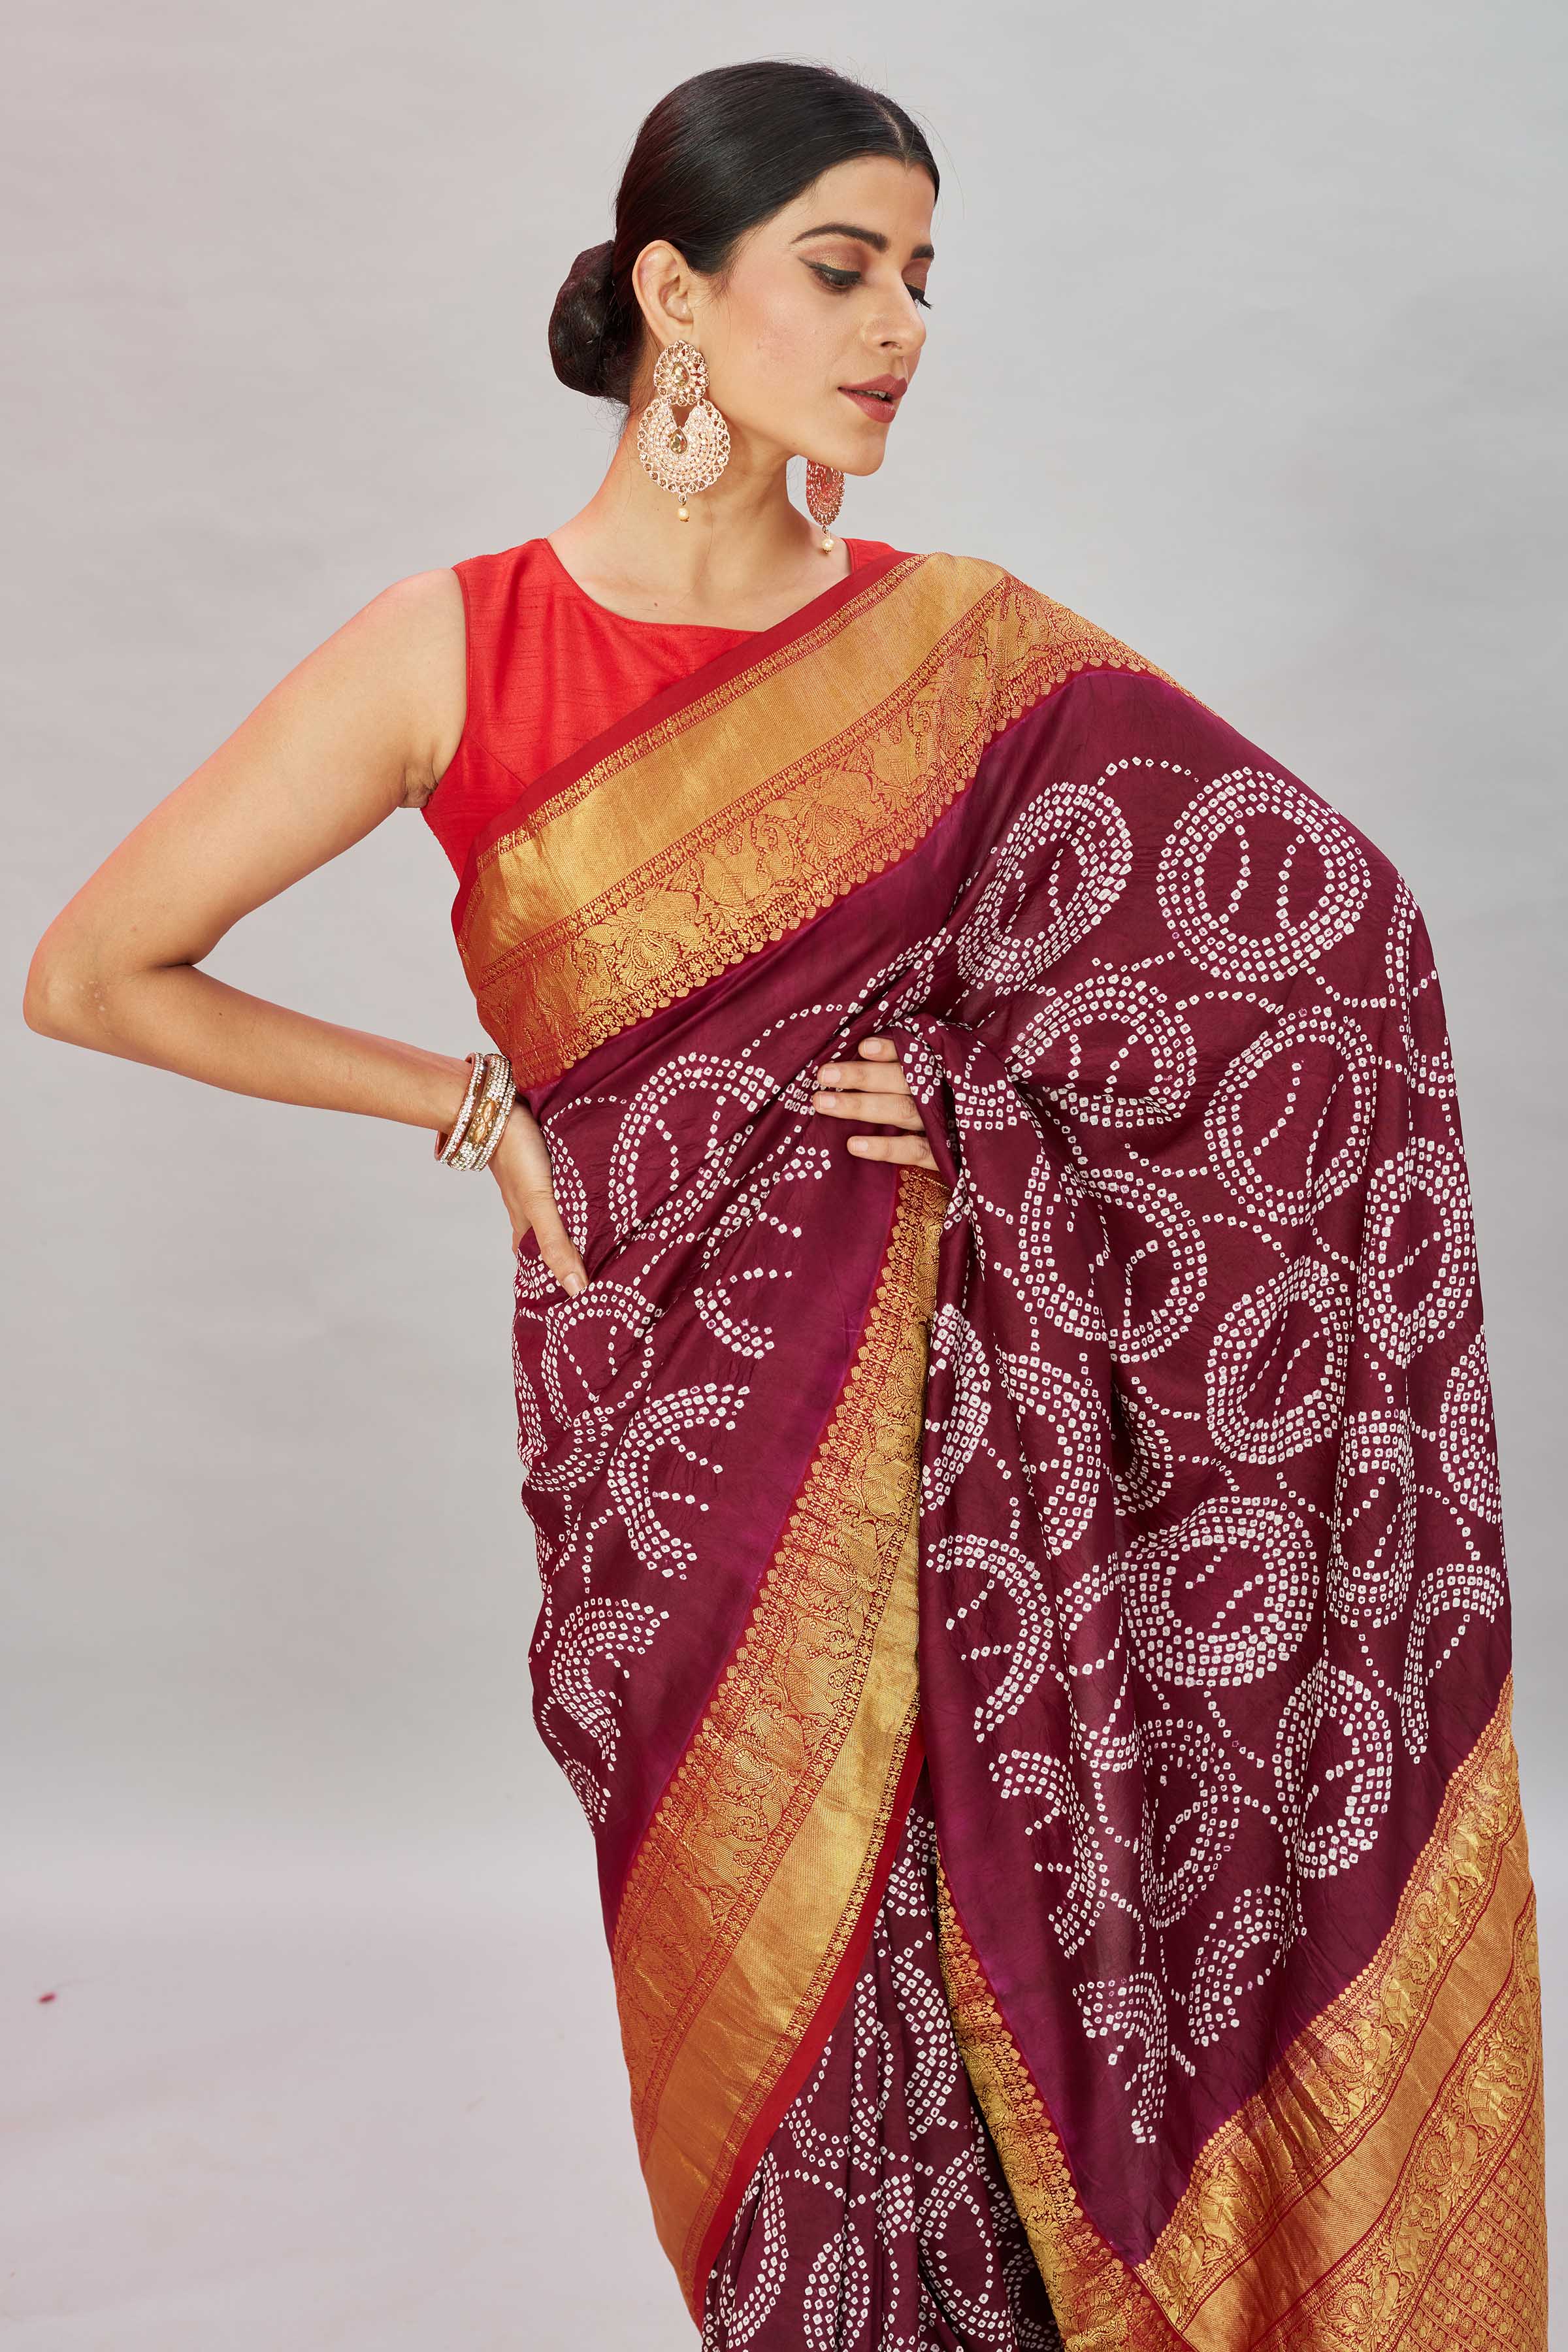 Buy wine color bandhej Kanjivaram silk sari online in USA with zari border. Look your best on festive occasions in latest designer sarees, pure silk sarees, Kanjivaram silk saris, handwoven saris, tussar silk sarees, embroidered saris from Pure Elegance Indian clothing store in USA.-closeup